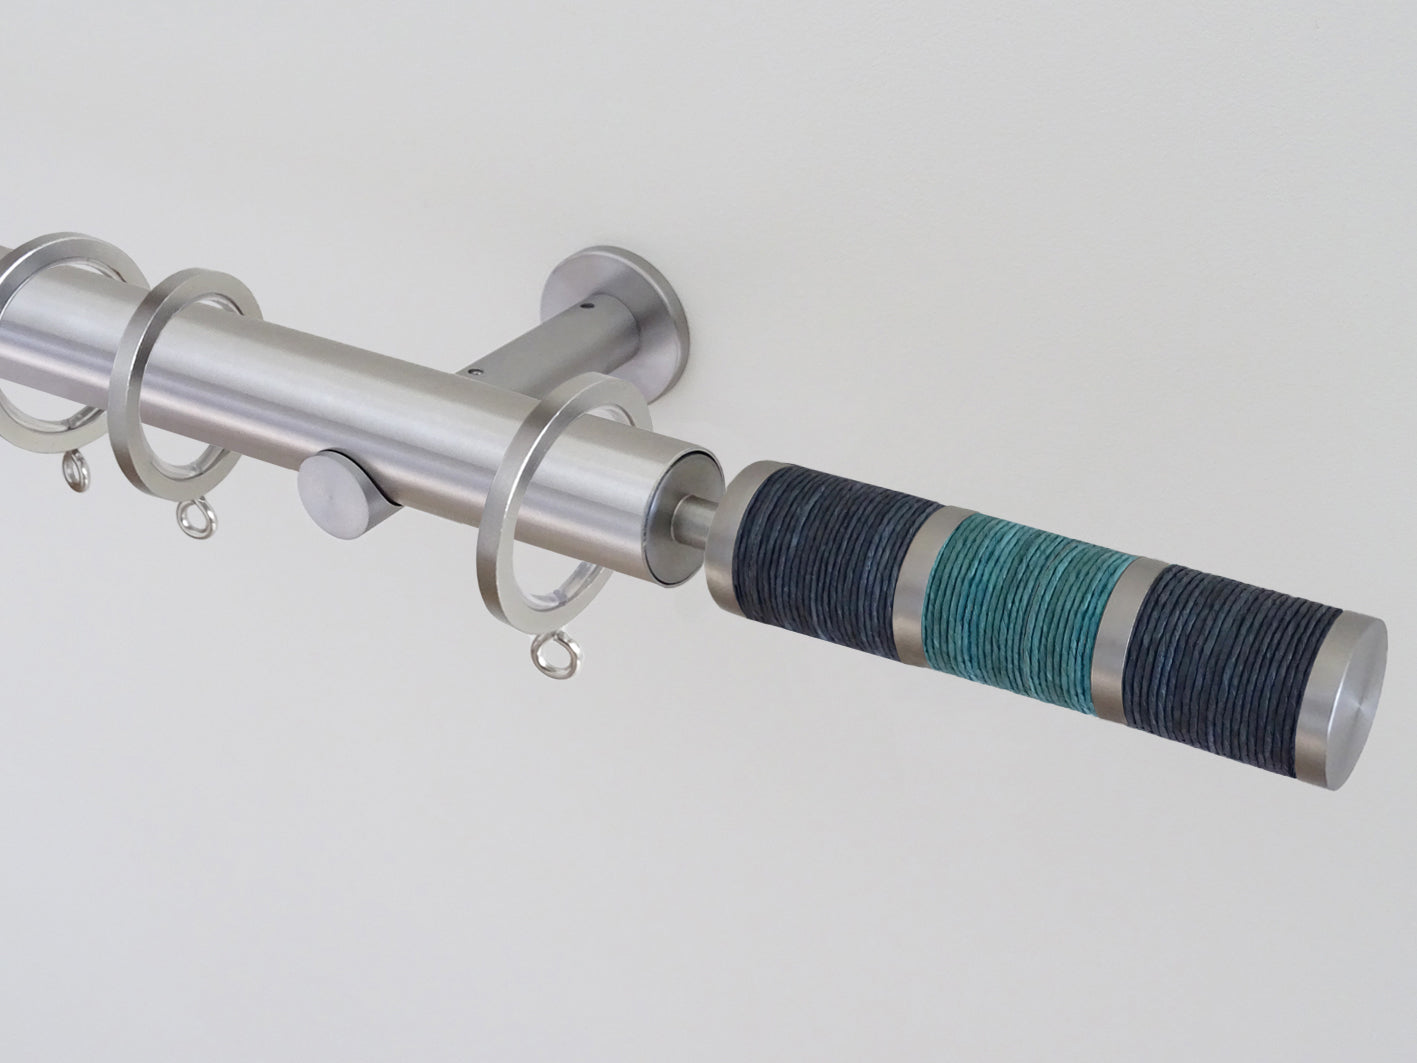 30mm diameter stainless steel curtain pole collection with bespoke coloured combination finials